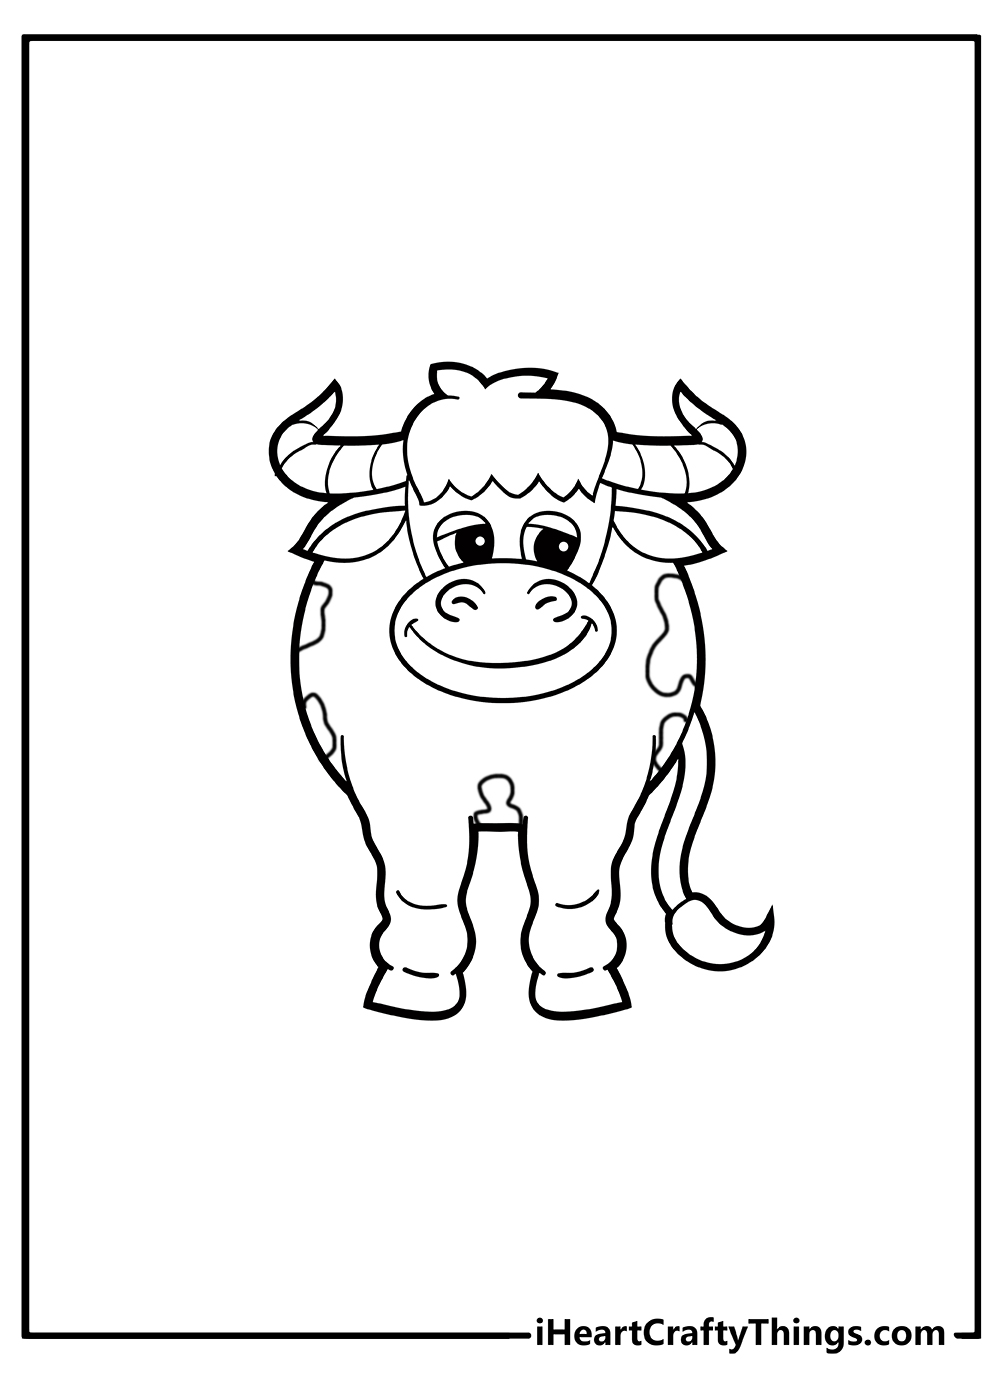 Cow Coloring sheets free download